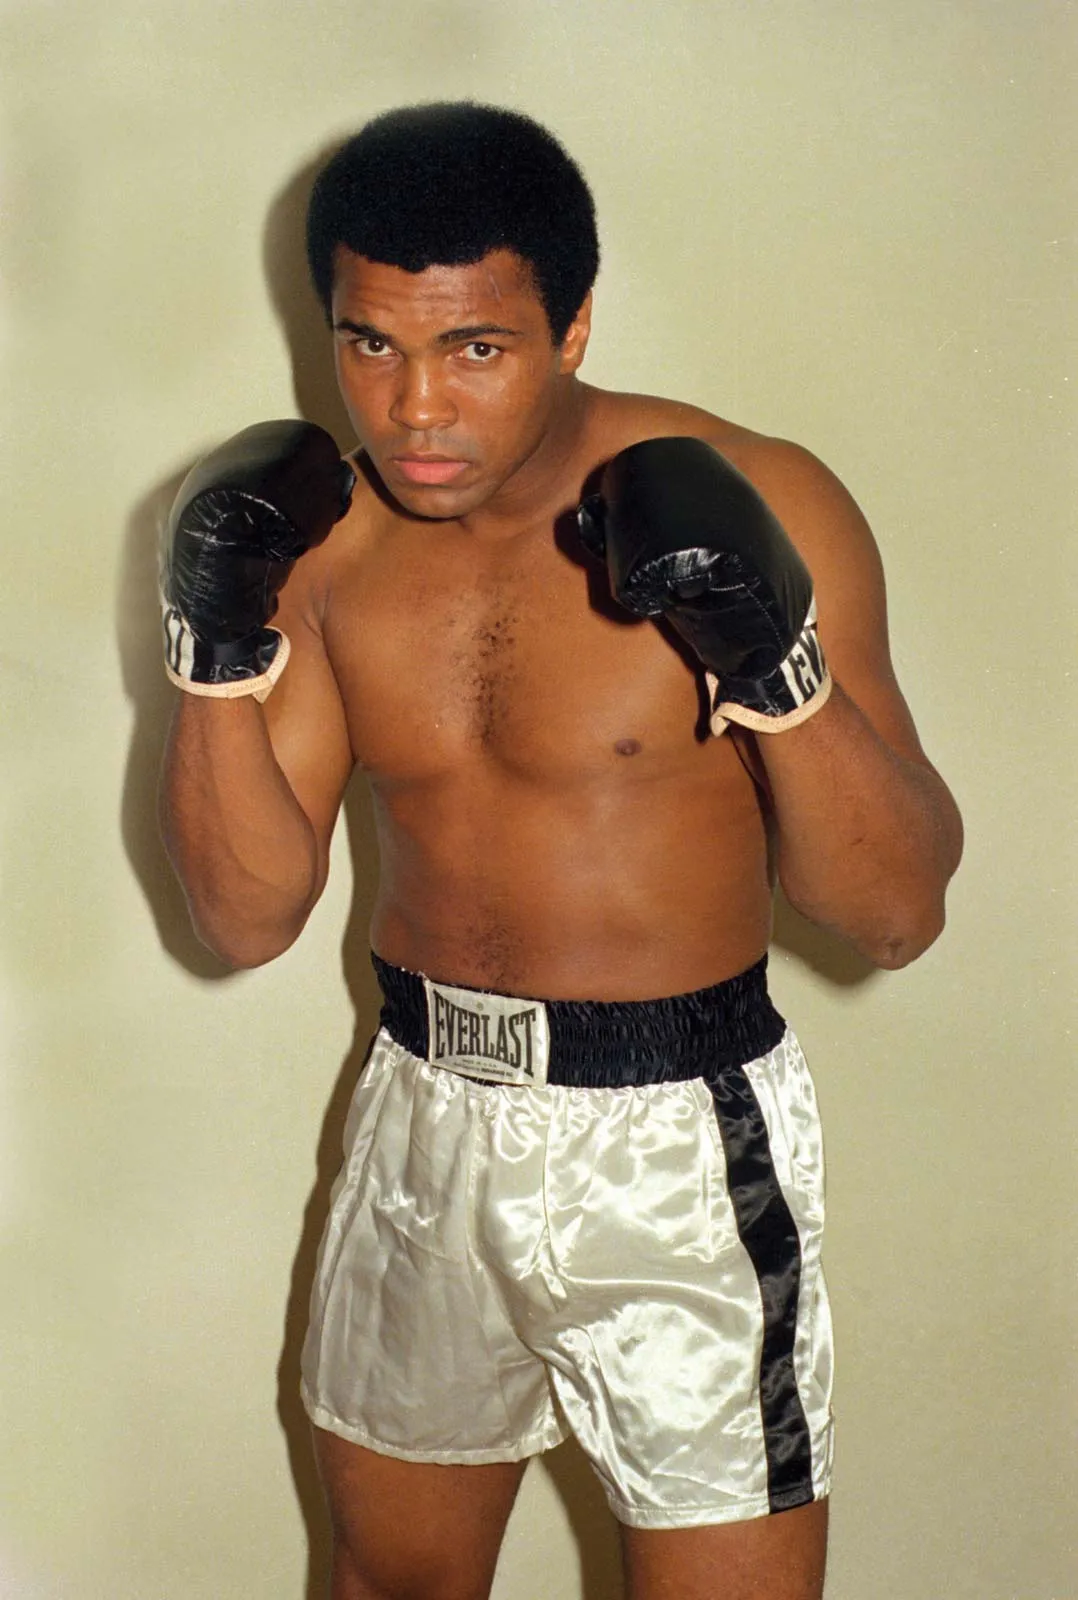 Muhammad Ali Is One Of The Greatest Boxers In History (Source: Britannica